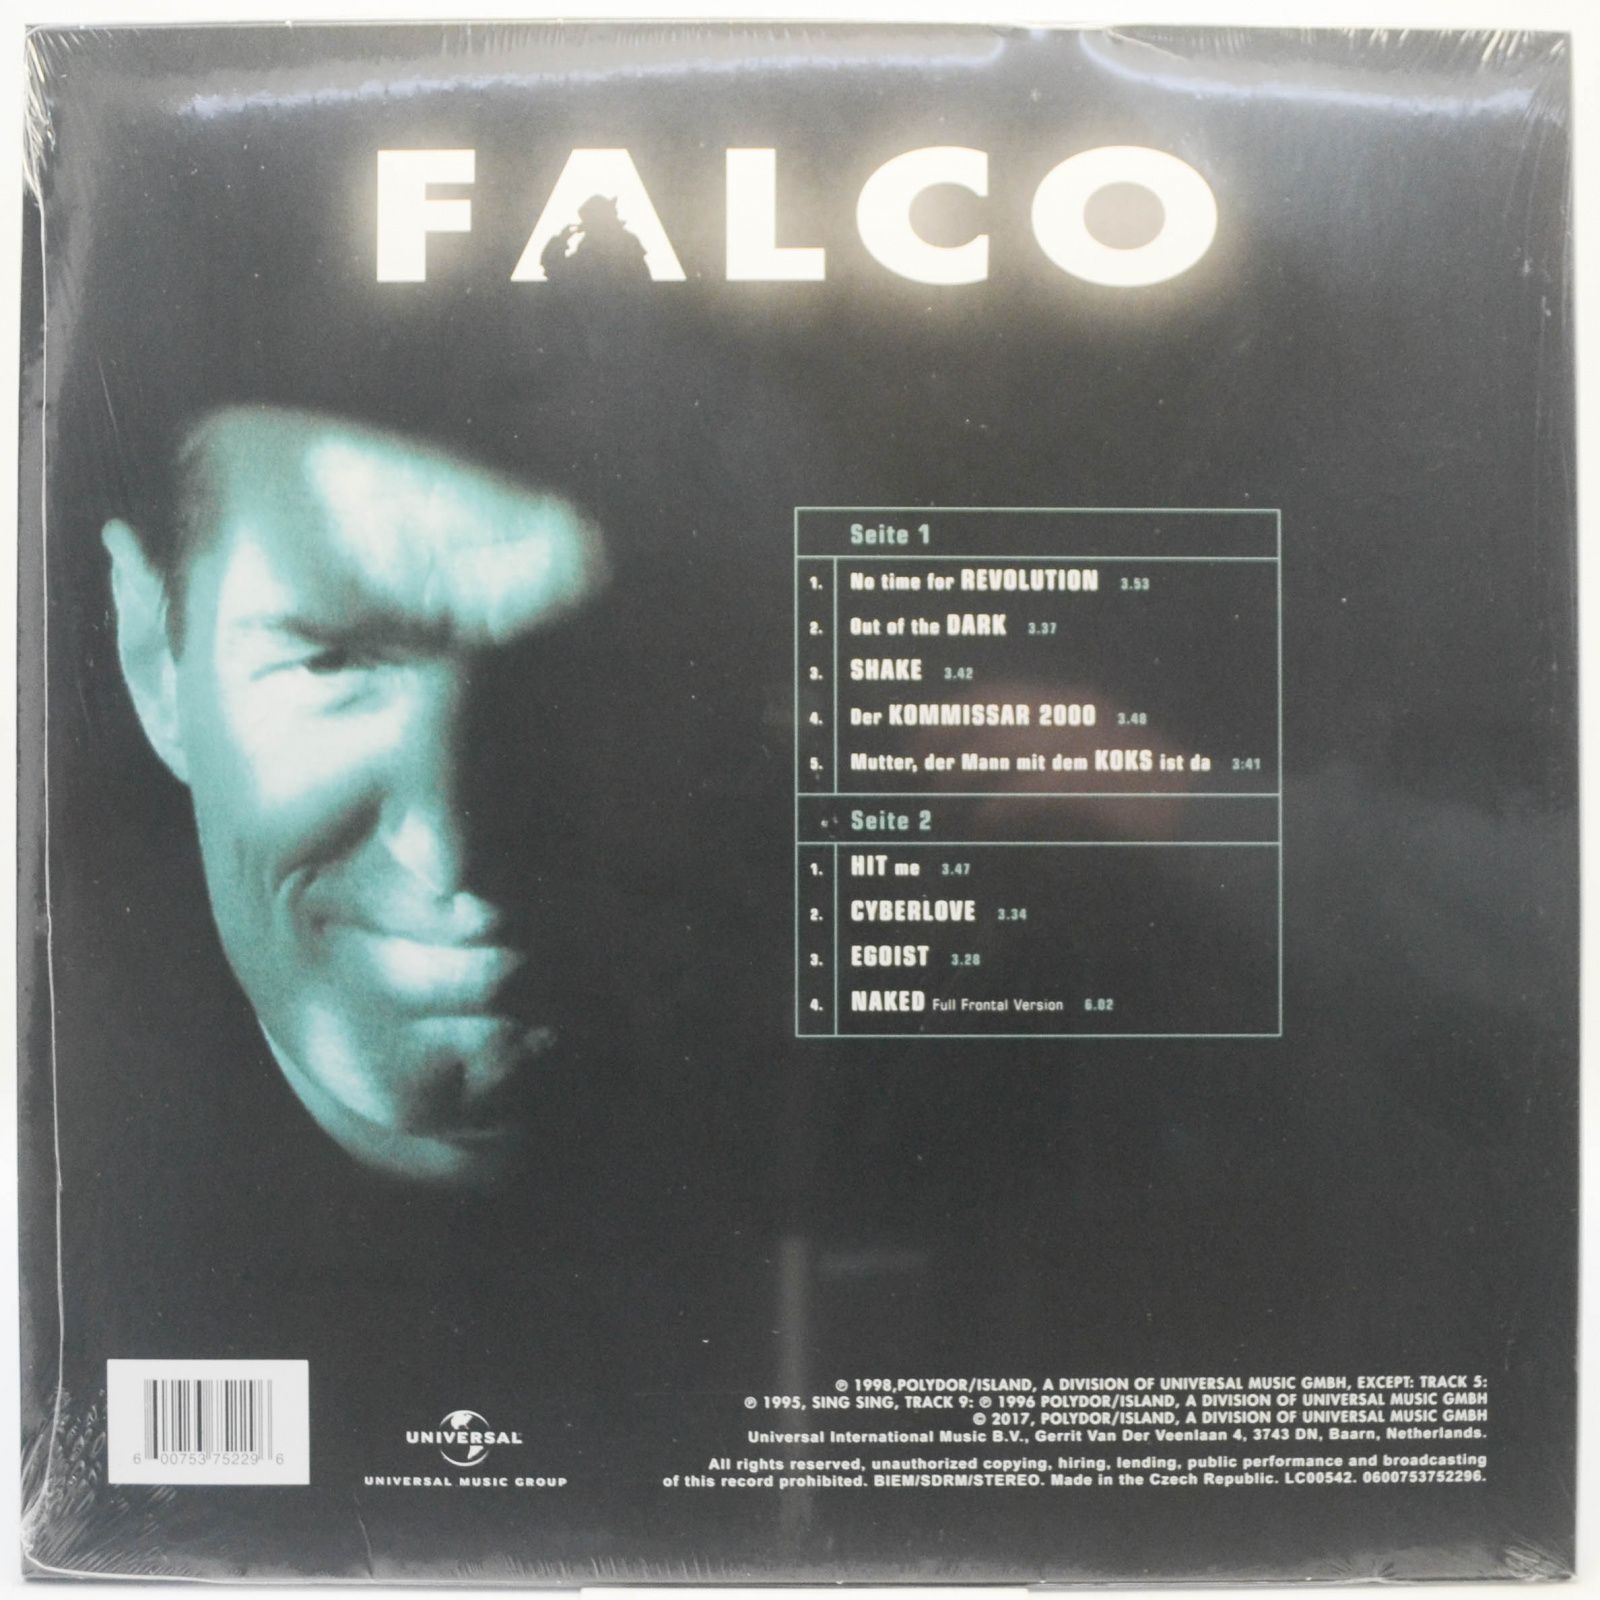 Falco — Out Of The Dark (Into The Light), 1998